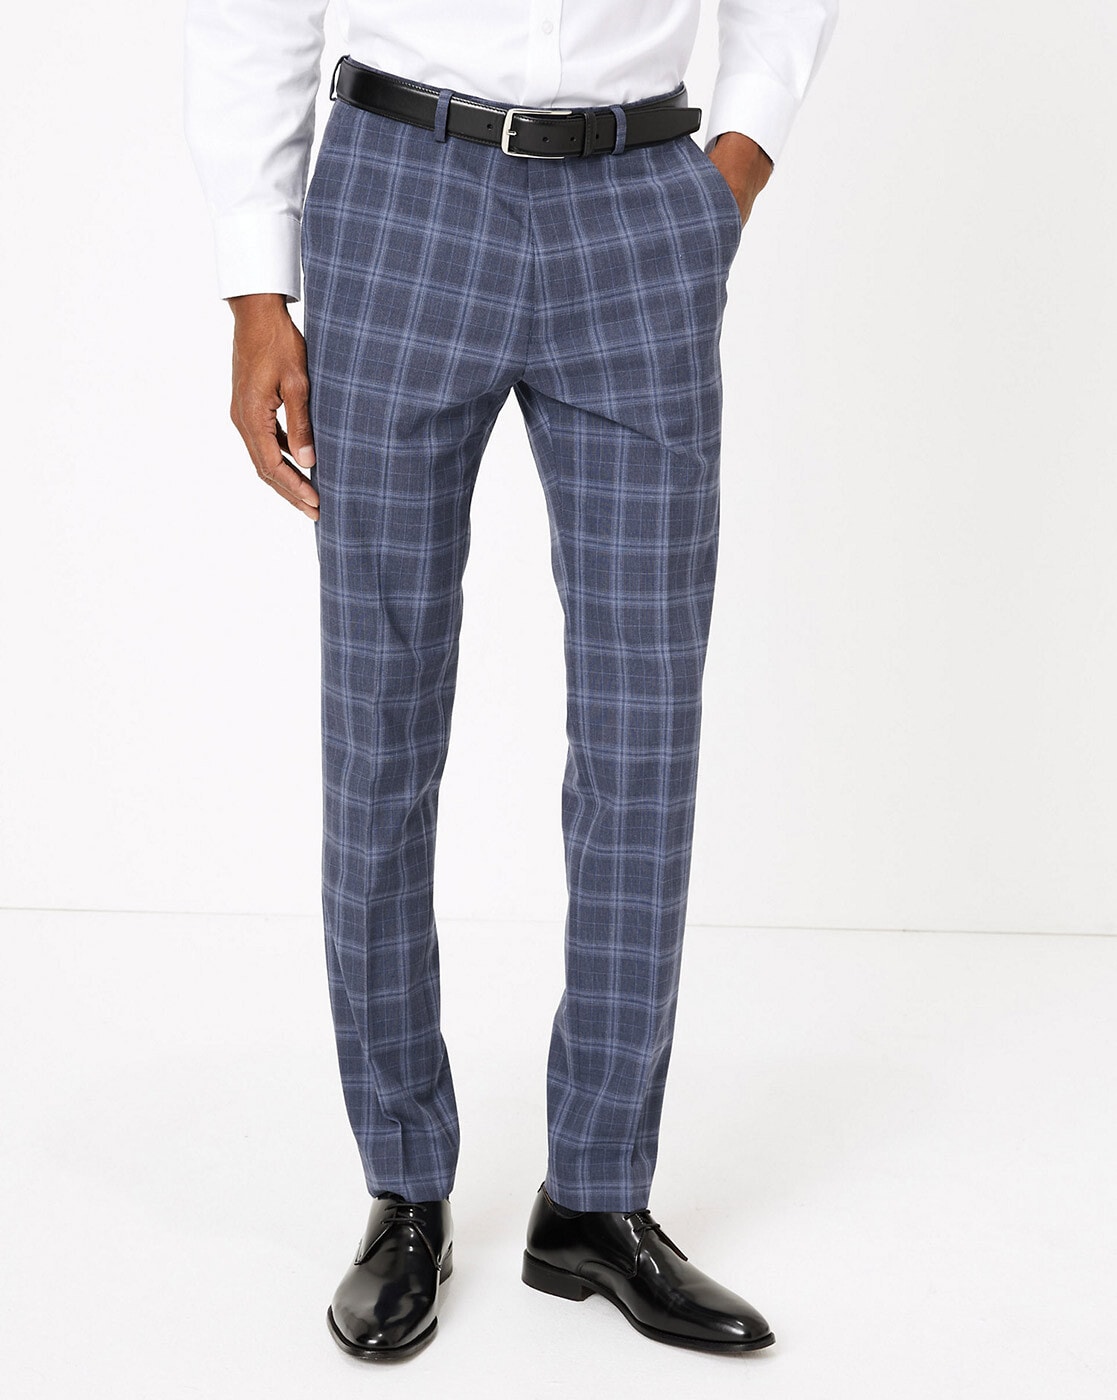 Blue Women Red Checked Joggers Trousers